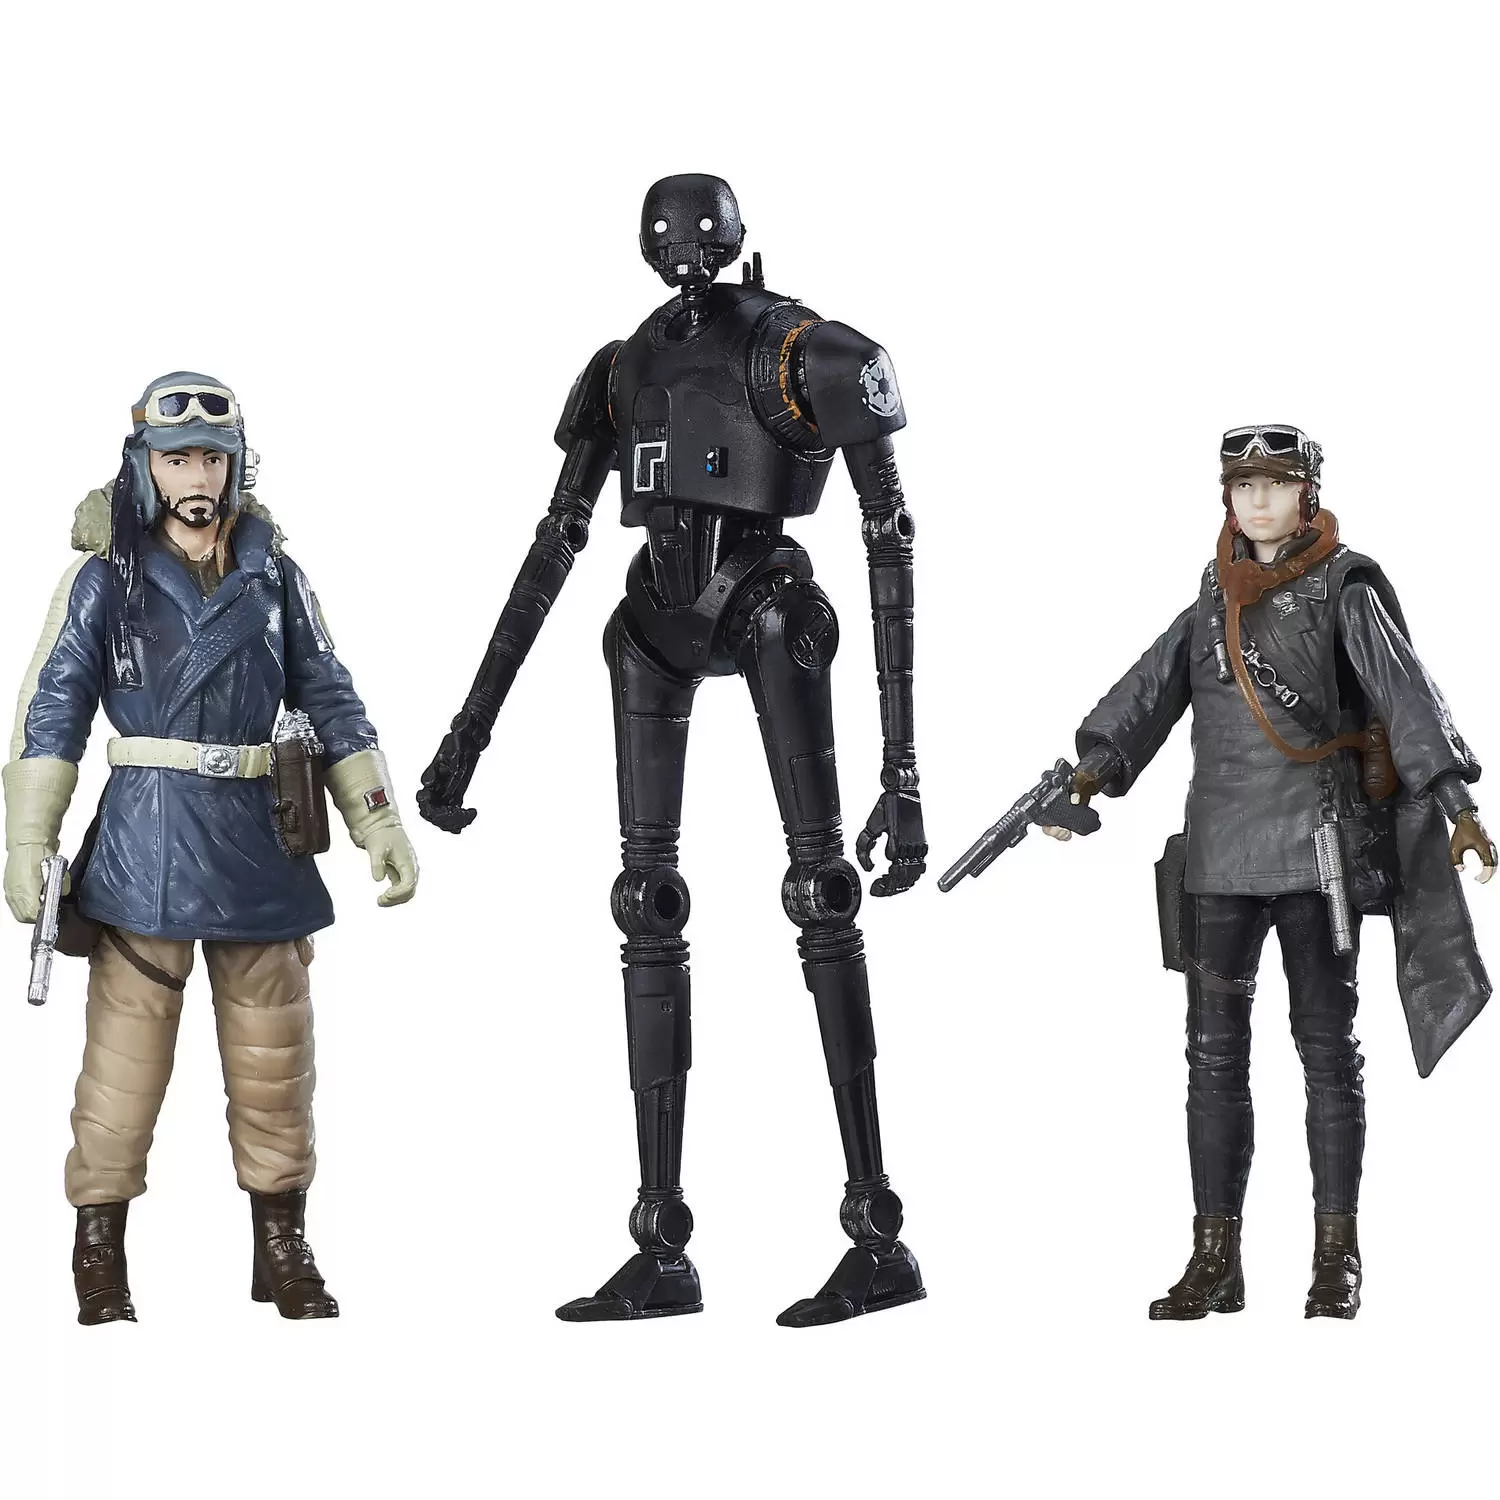 Rogue One - Rogue One 3-Pack (Walmart)